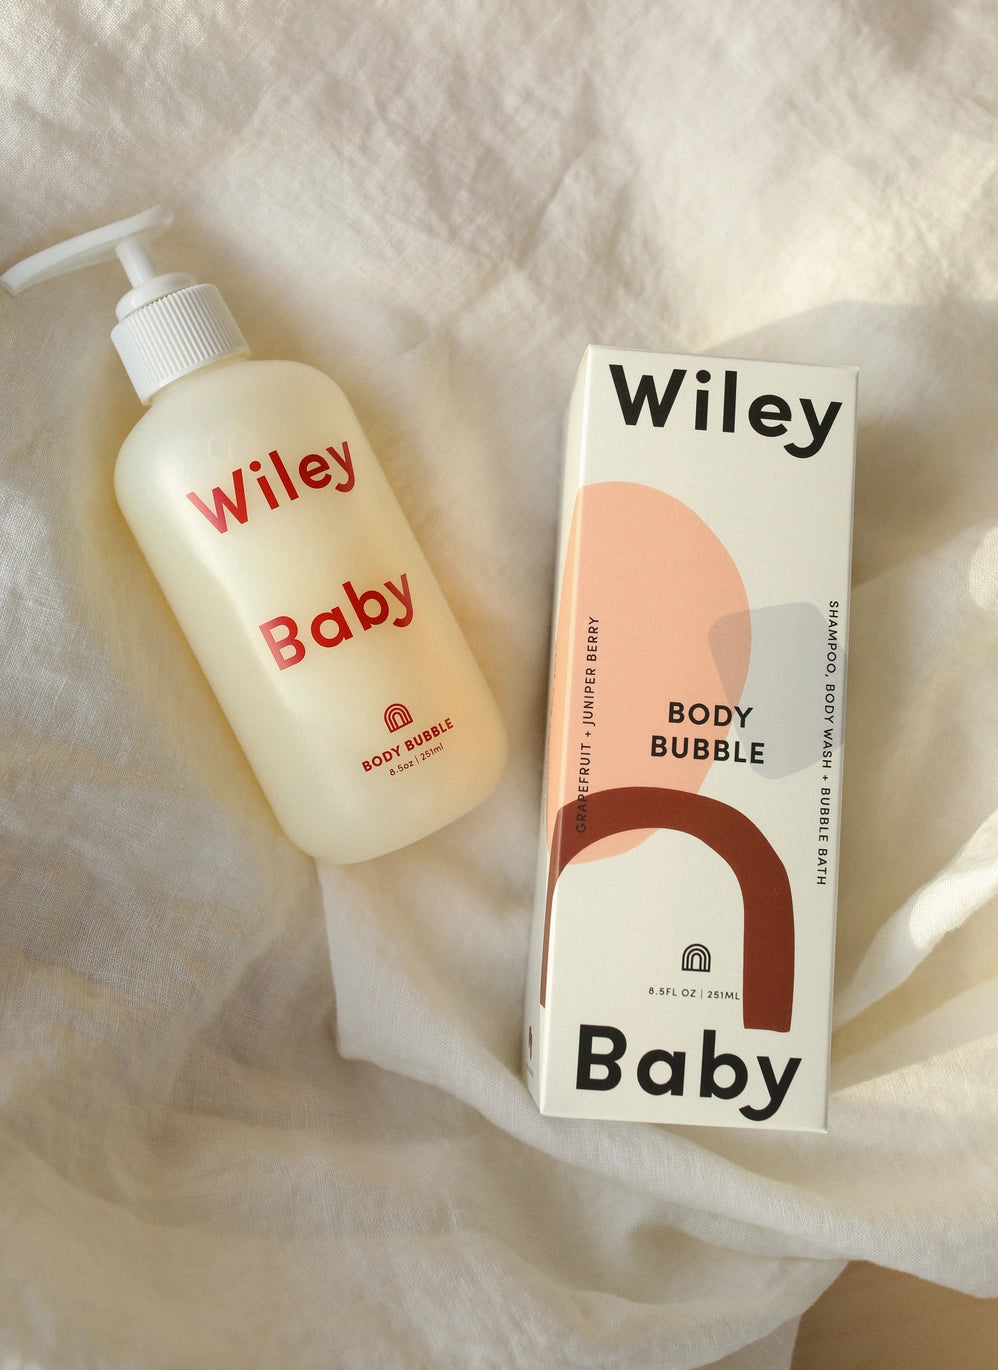 The Baby Body Bubble by Wiley Body